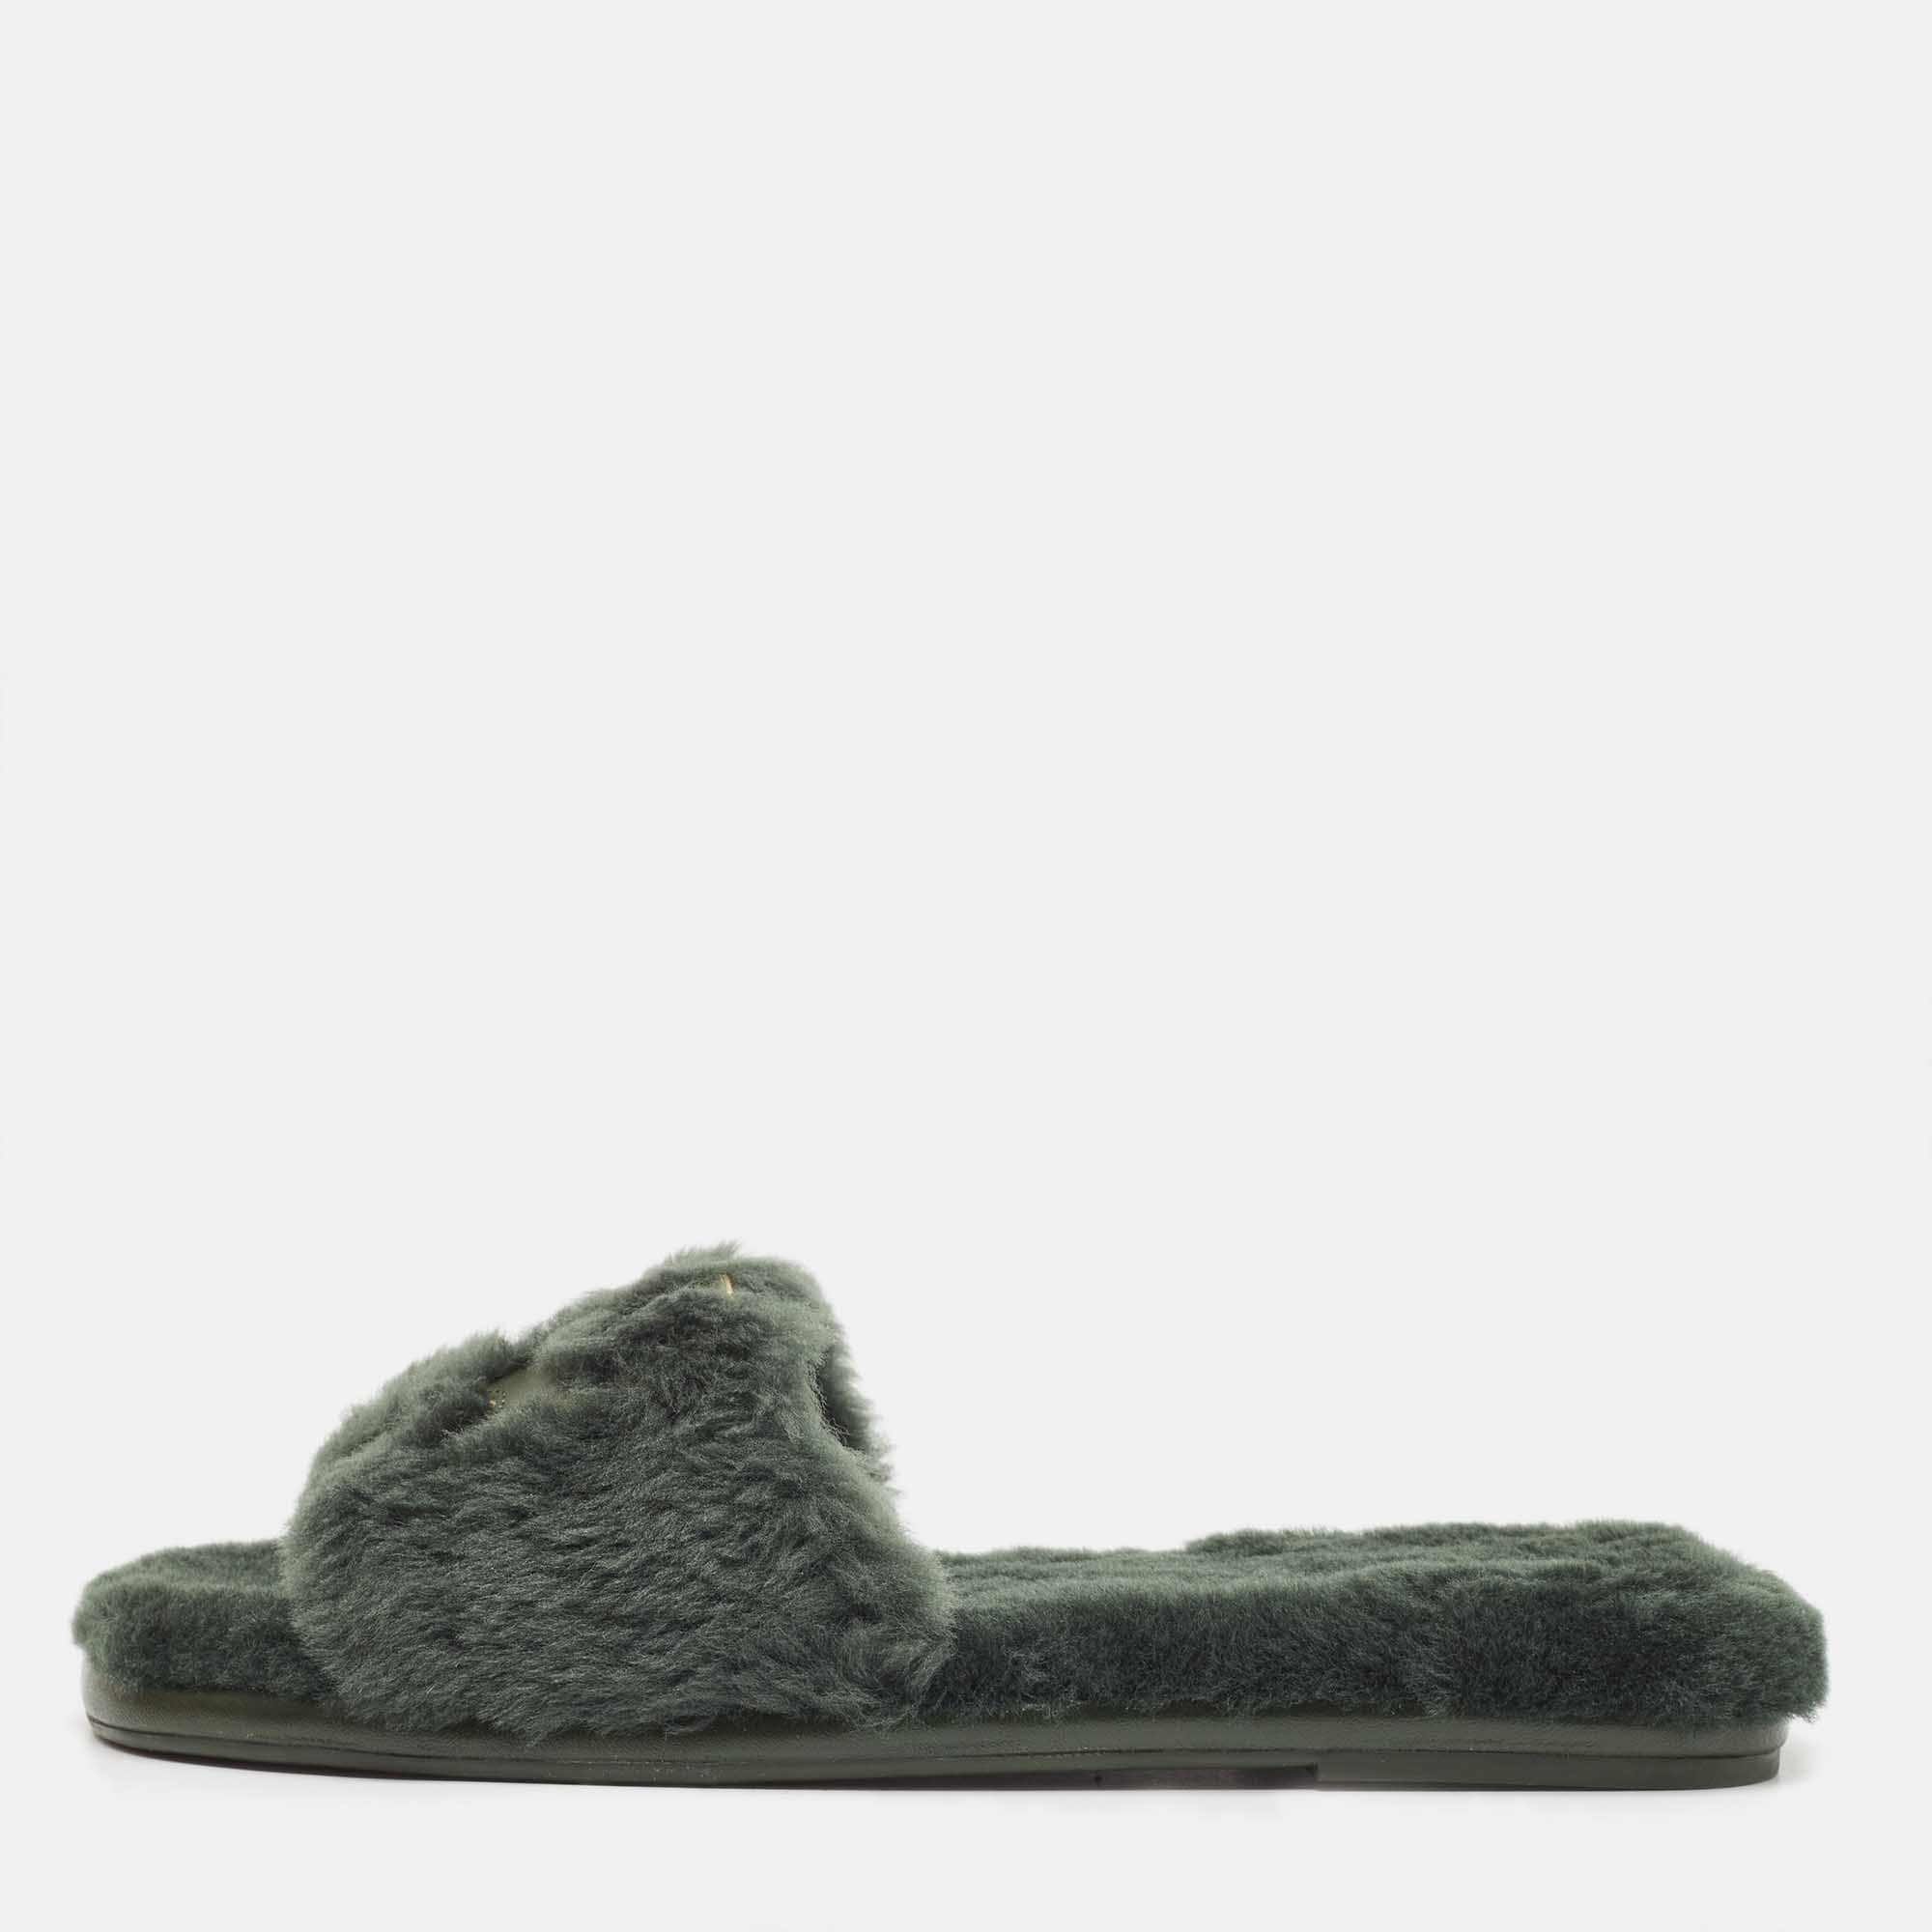 

Tory Burch Green Shearling and Leather Flat Slides Size